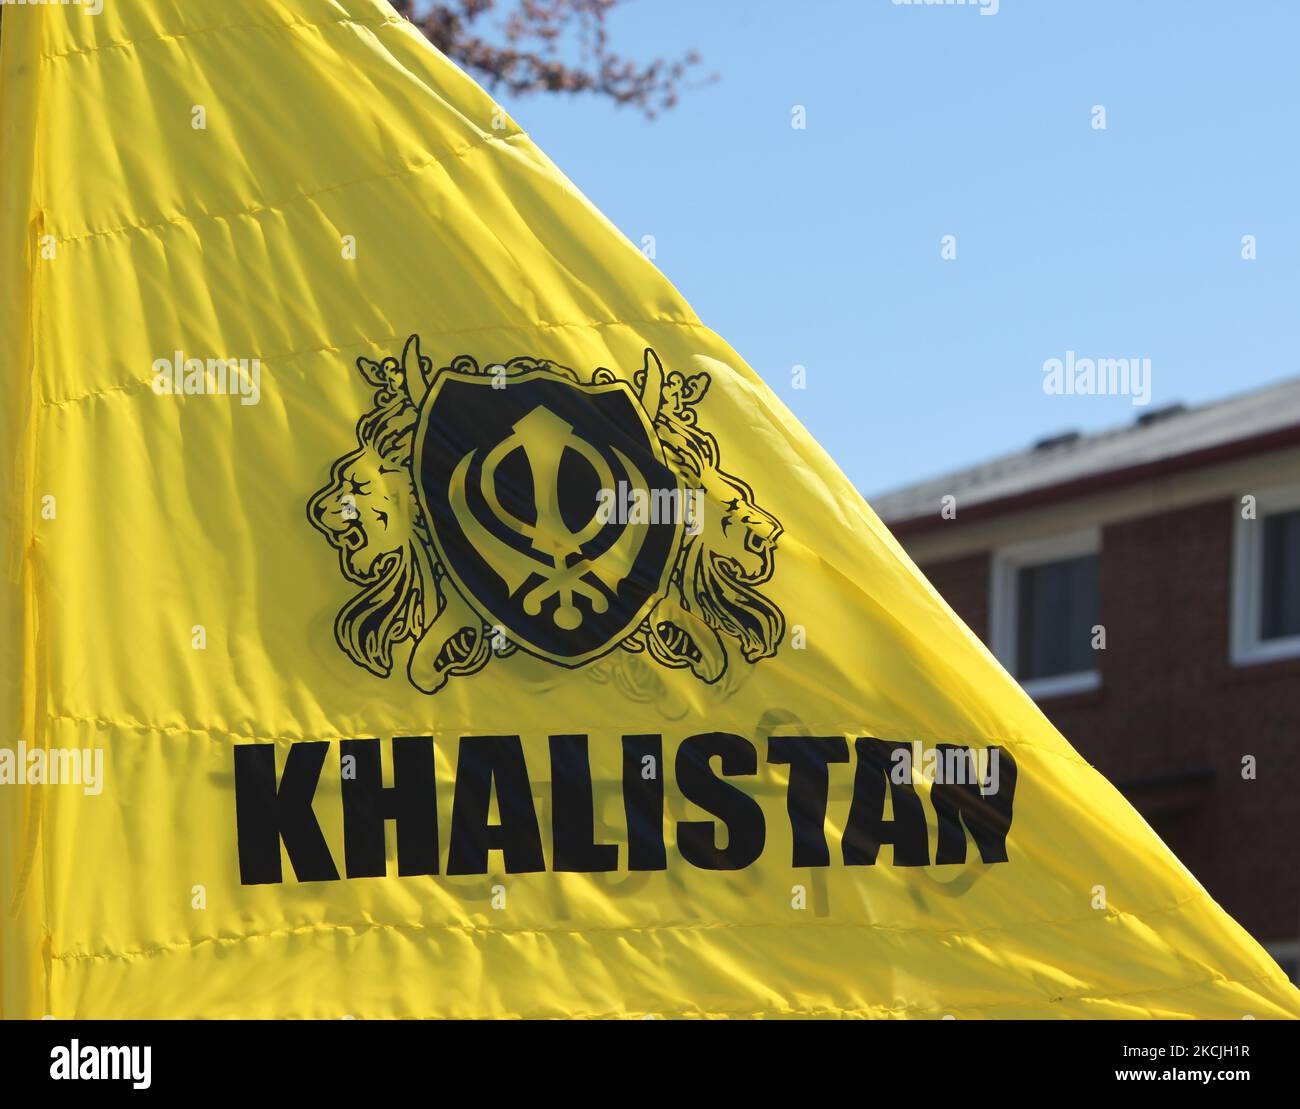 Khalistan flag seen as Canadian Pro-Khalistan Sikhs protest against the Indian government and call for a separate Sikh state called Khalistan in Malton, Ontario, Canada, on May 05, 2013. Thousands of Sikhs attended a Nagar Kirtan to celebrate Vaisakhi and to show their discontent with the Indian government. The Khalistan movement refers to a movement which seeks to create a separate Sikh state, called Khalistan in the Punjab region of India. The territorial definition of the proposed nation is disputed, with some believing it should be carved simply out of the Indian state of Punjab, where Sik Stock Photo